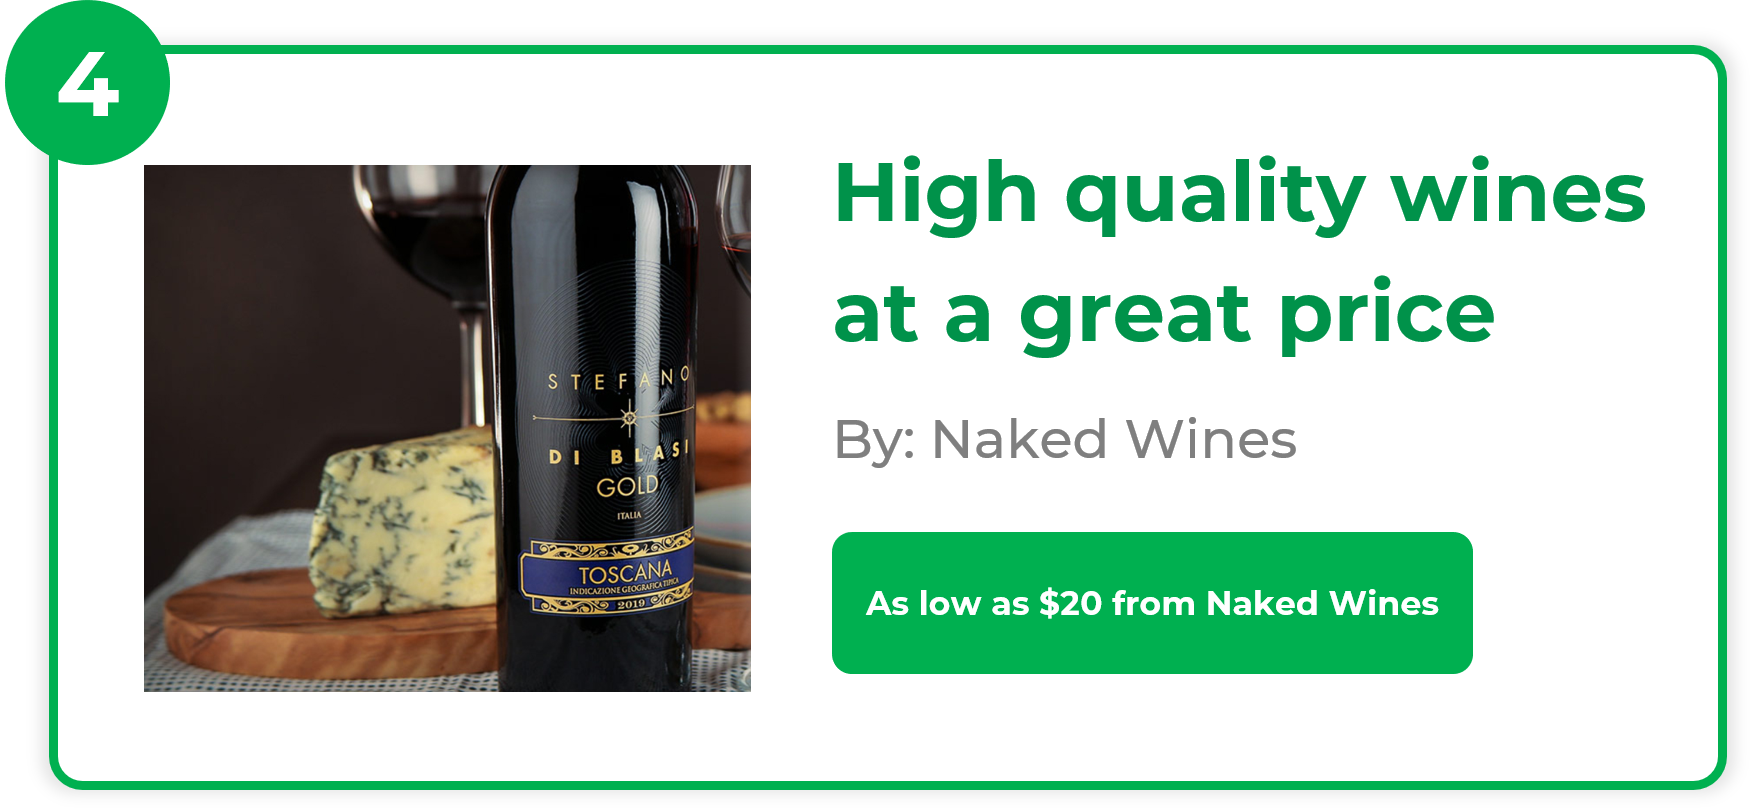 High quality wines at a great price - Naked Wines